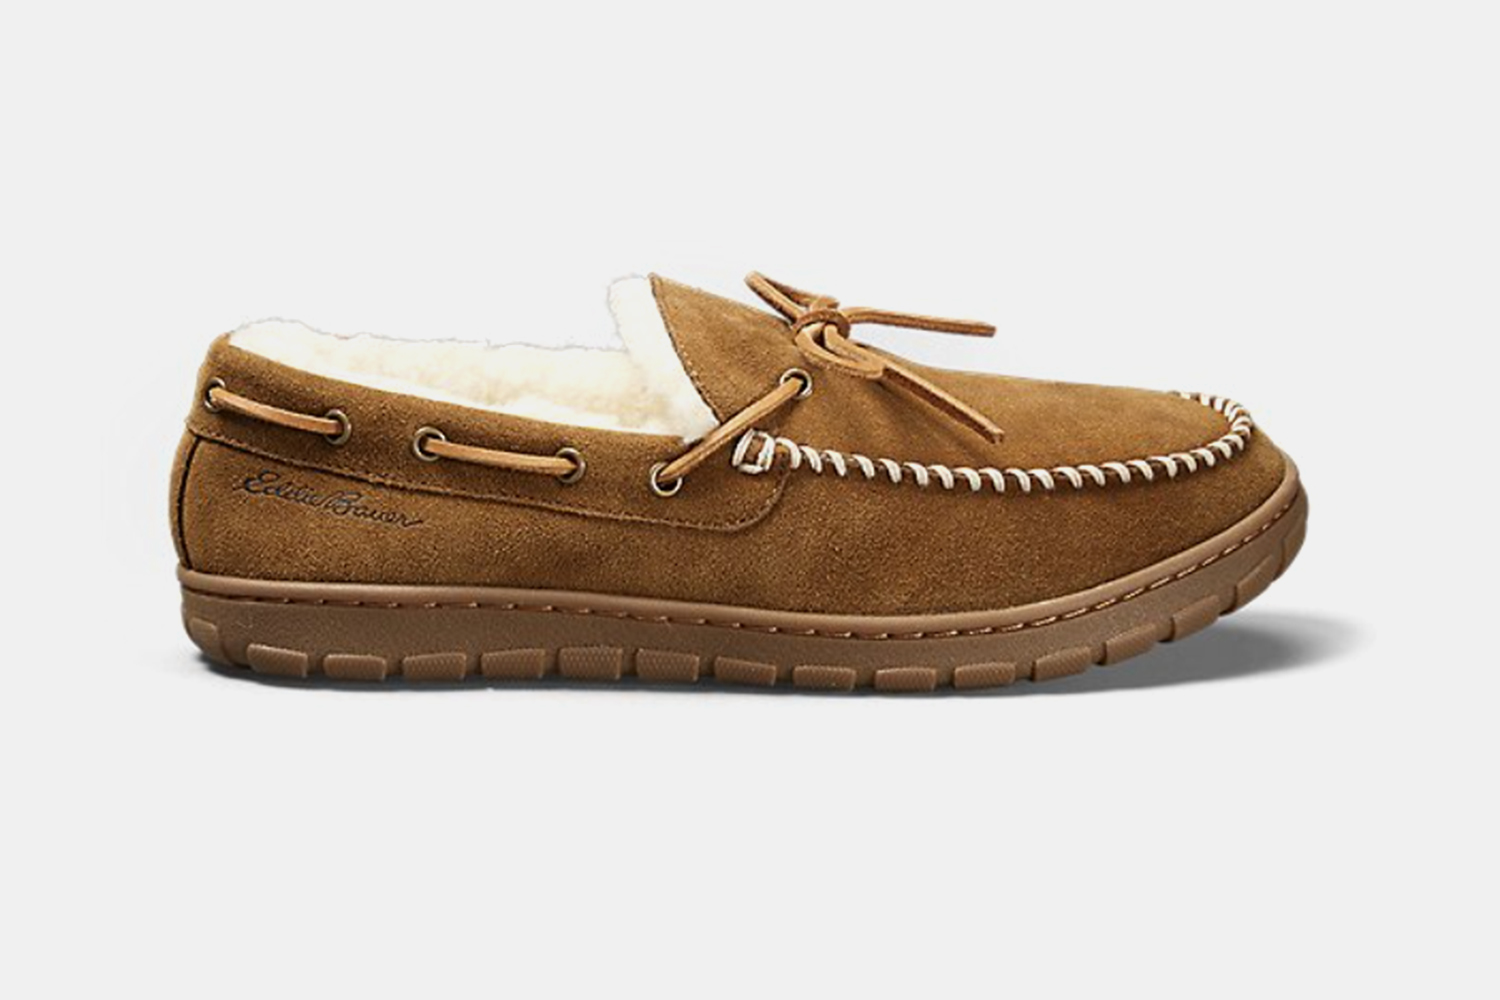 These Shearling-Lined Slippers Are $33 